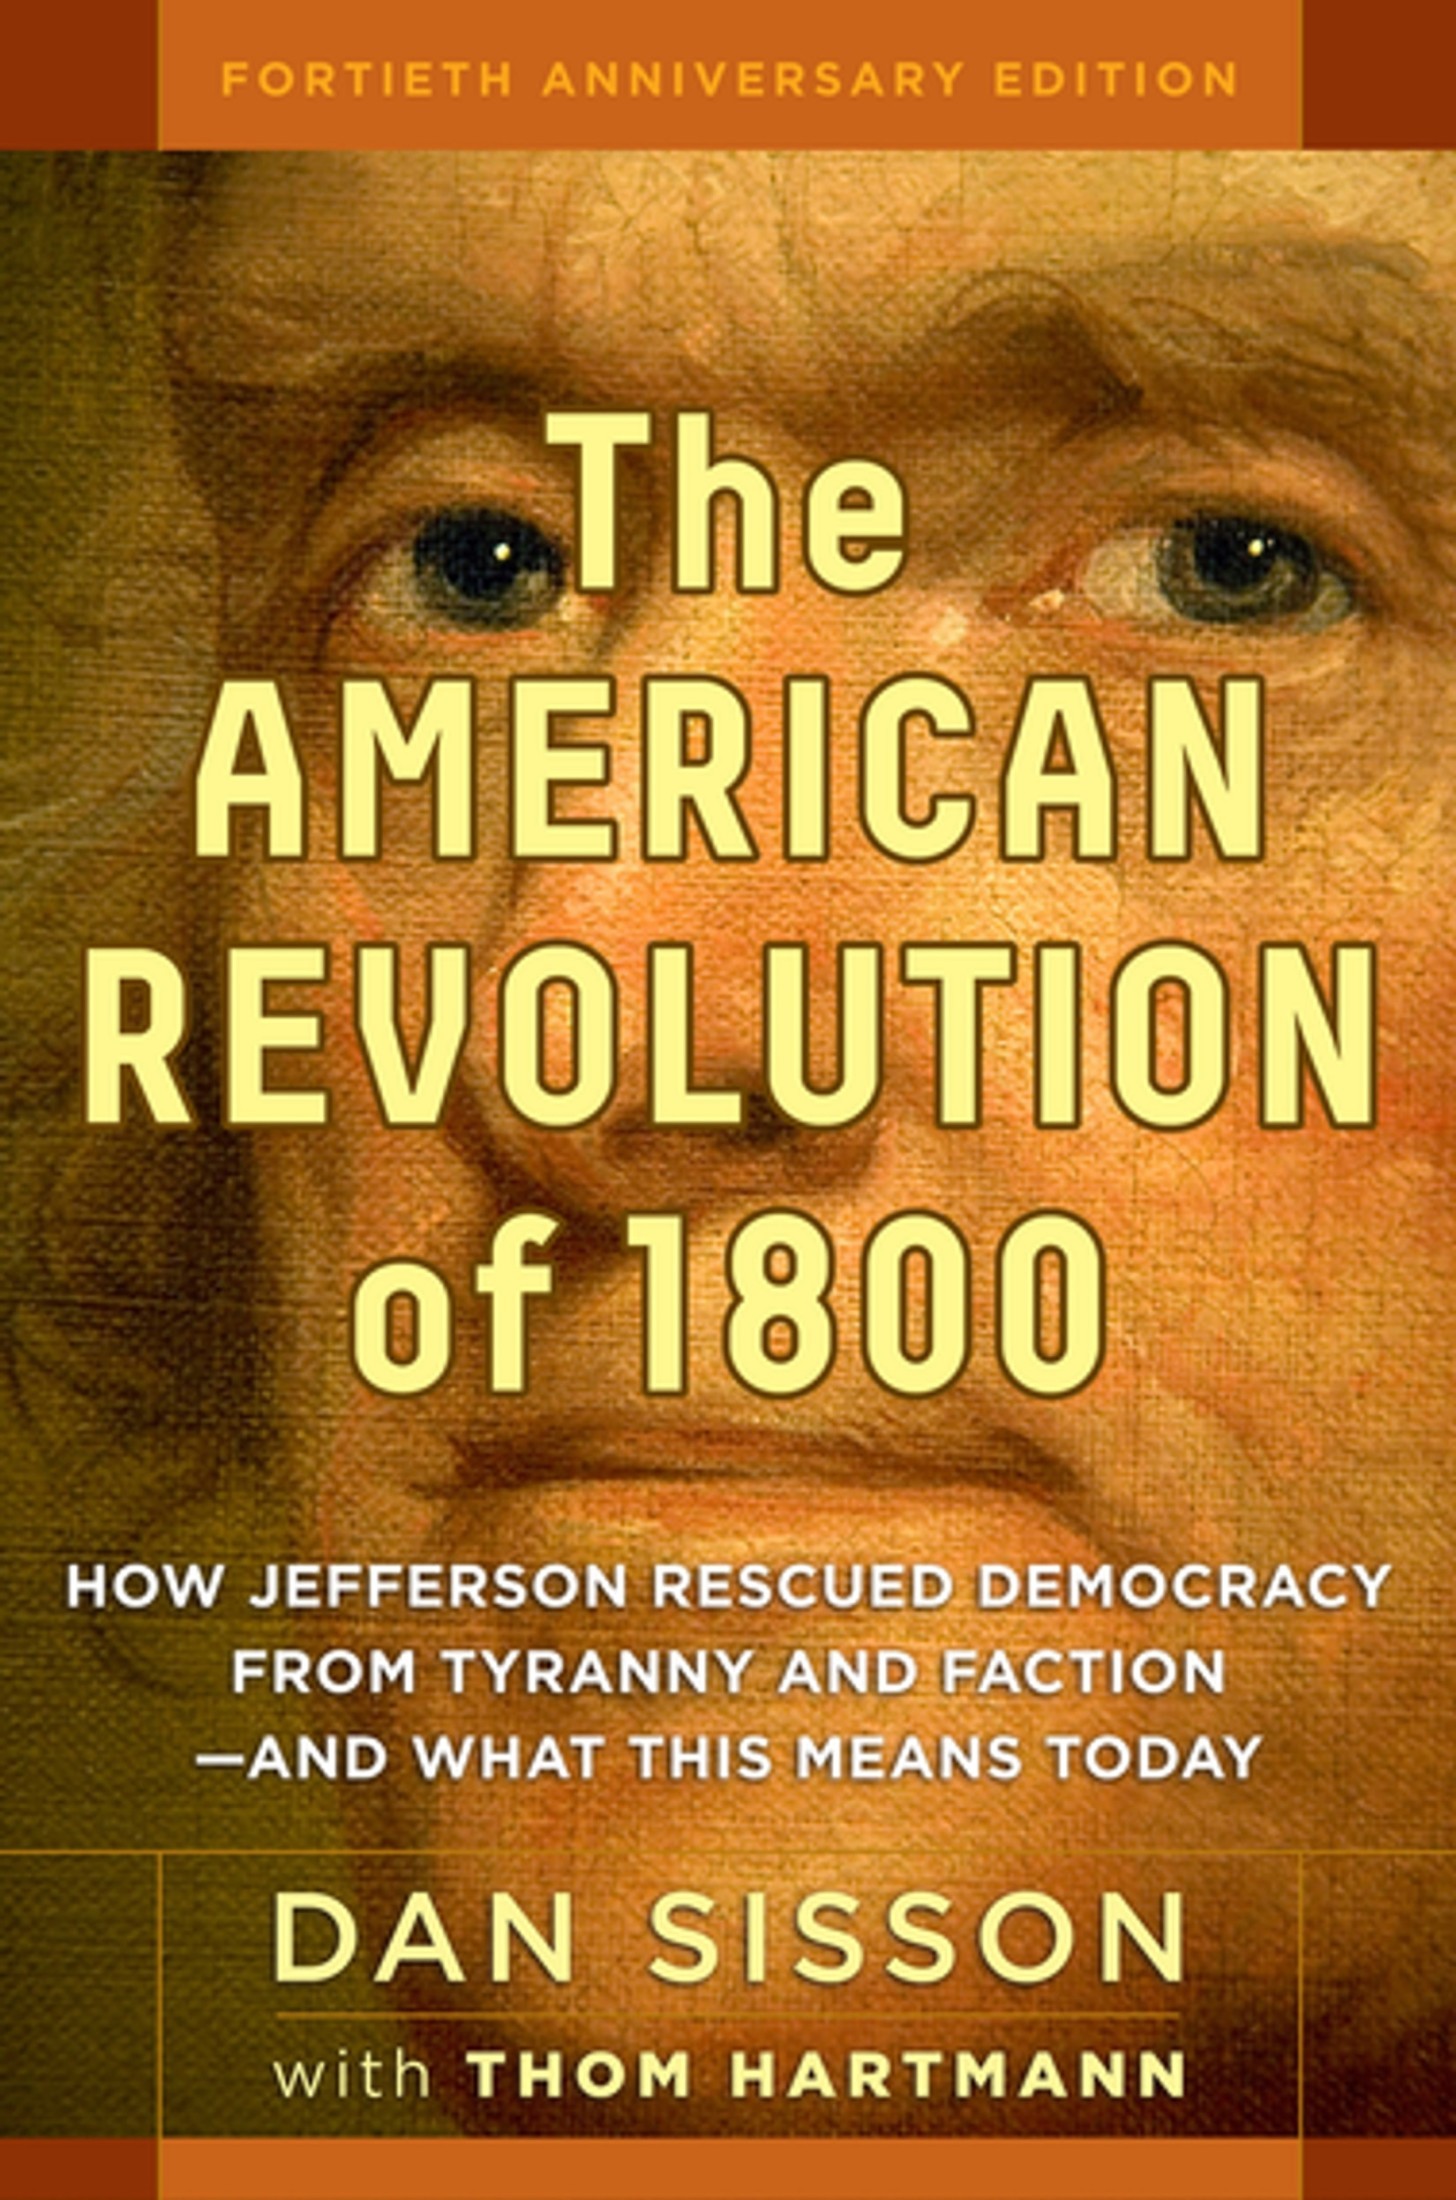 The American Revolution of 1800: How Jefferson Rescued Democracy From Tyranny and Faction—and What This Means Today